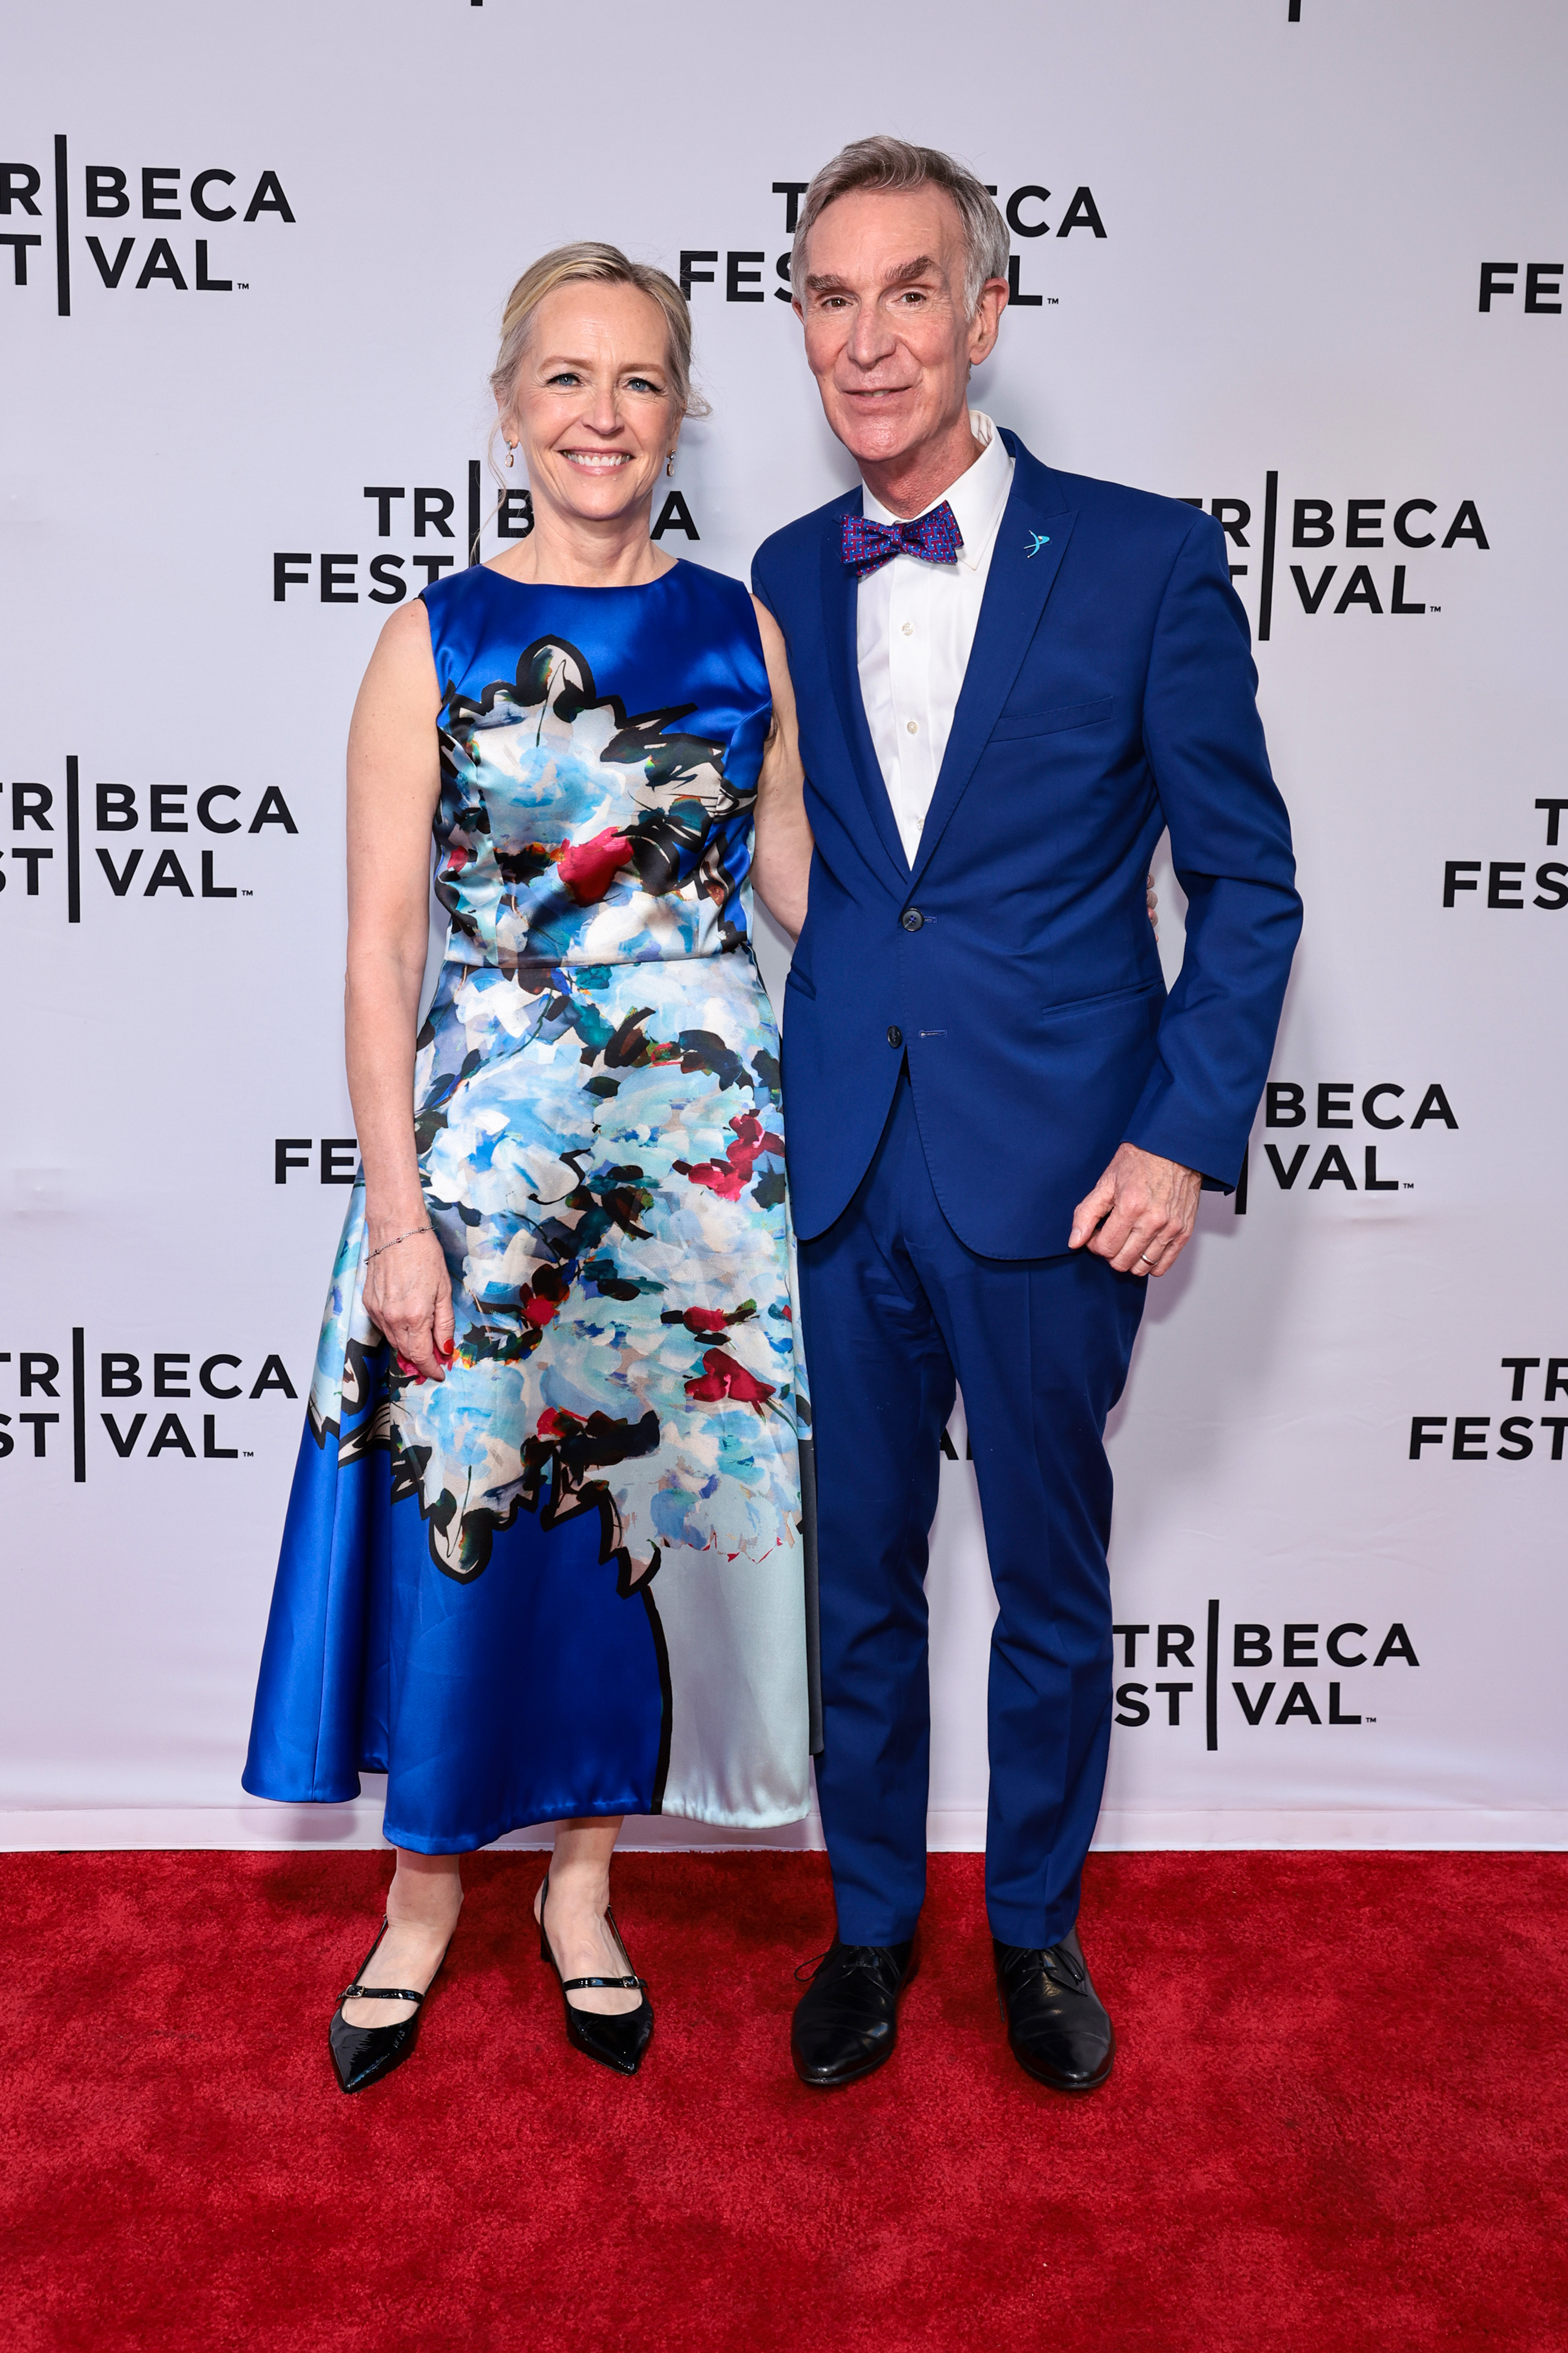 Liza Mundy and Bill Nye pose at "The End Is Nye" Premiere during 2022 Tribeca Festival at SVA Theater on June 17, 2022, in New York City | Source: Getty Images